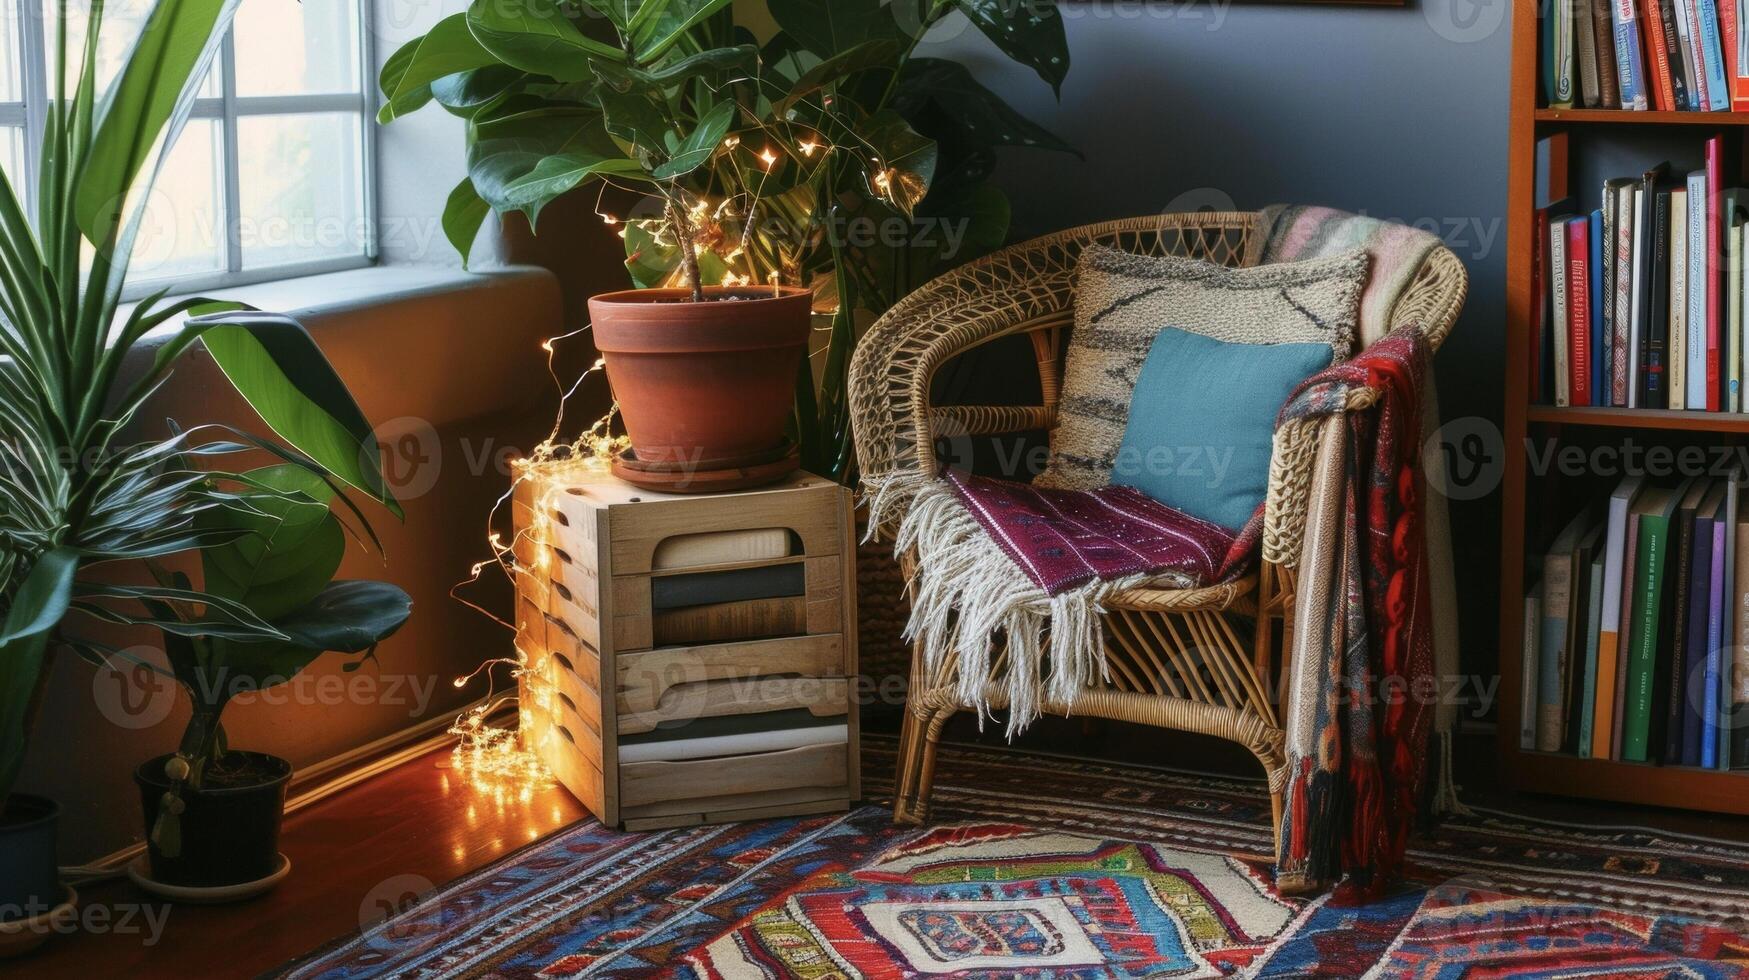 A bohemianinspired reading nook with a rattan chair a colorful kilim rug and a stack of books on a wooden crate side table. Twinkling fairy lights and potted plants add photo